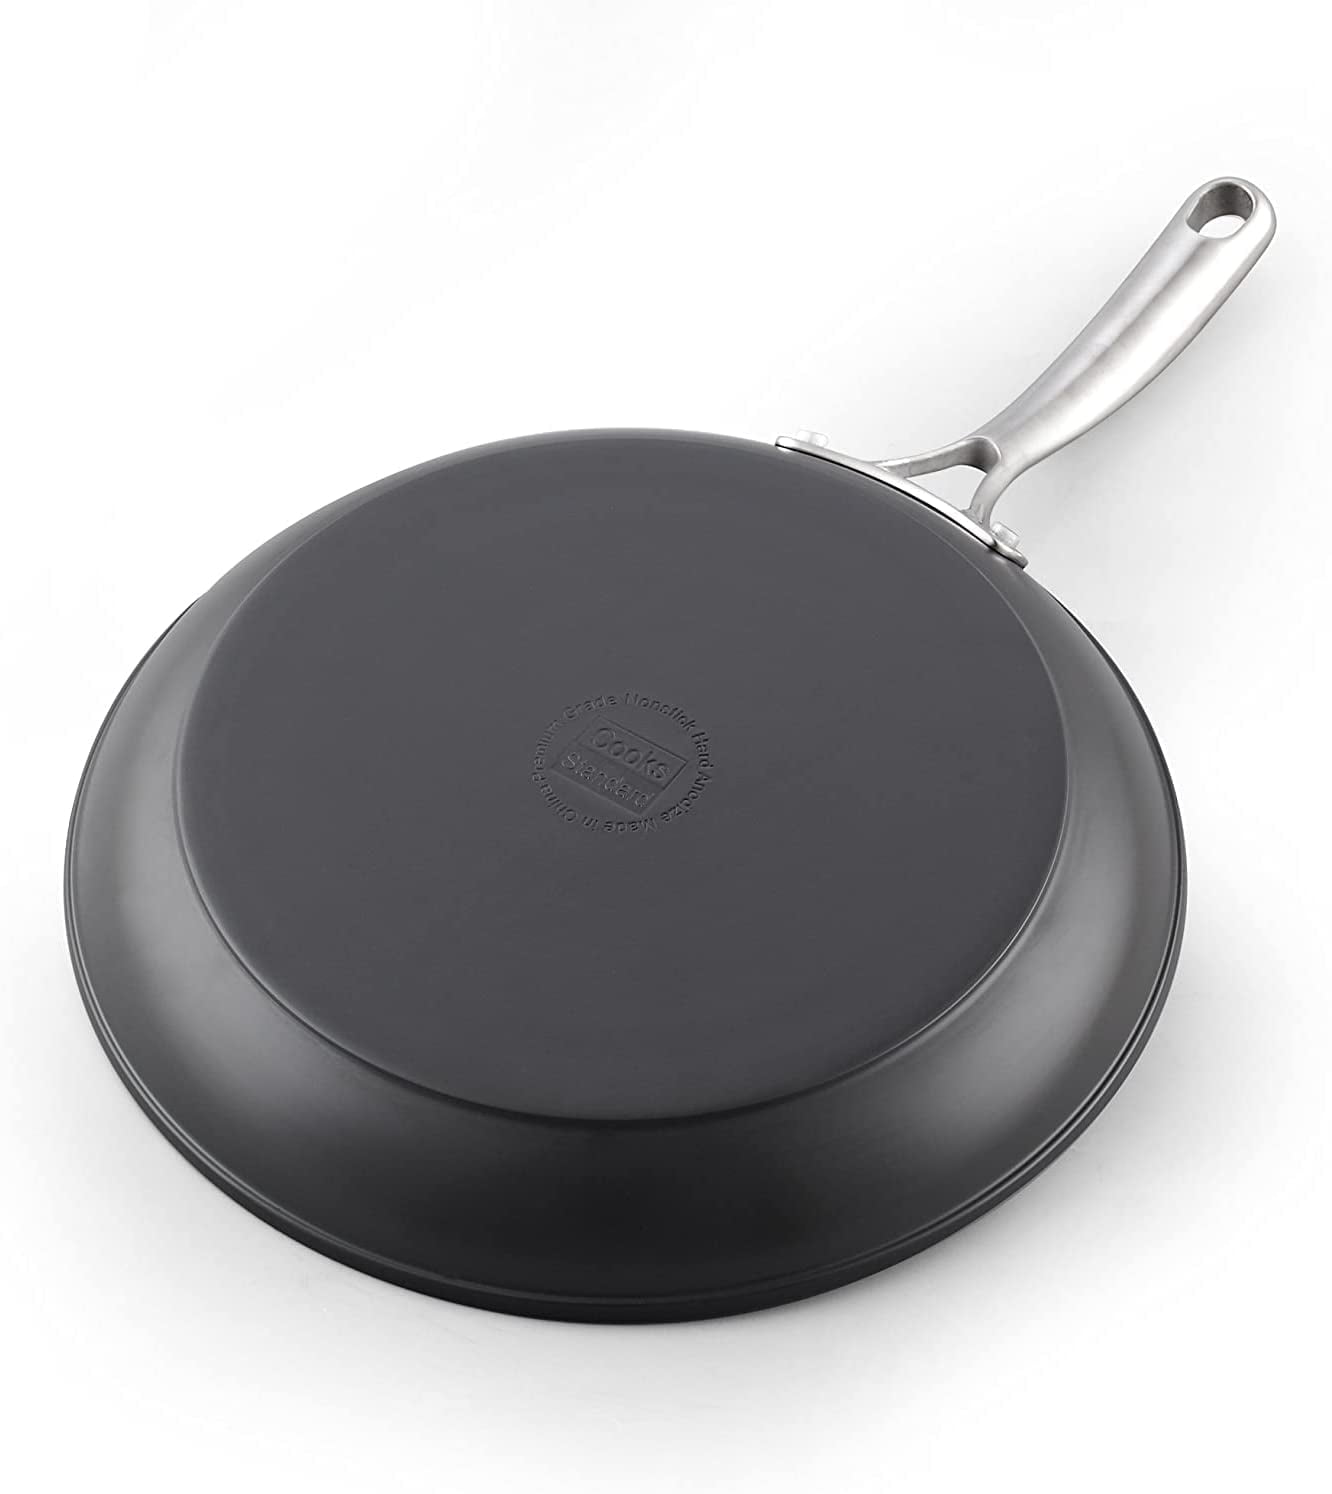 Cooks Standard 02637 Nonstick Hard Anodized 9.5-Inch 24cm Crepe Griddle Pan, Black